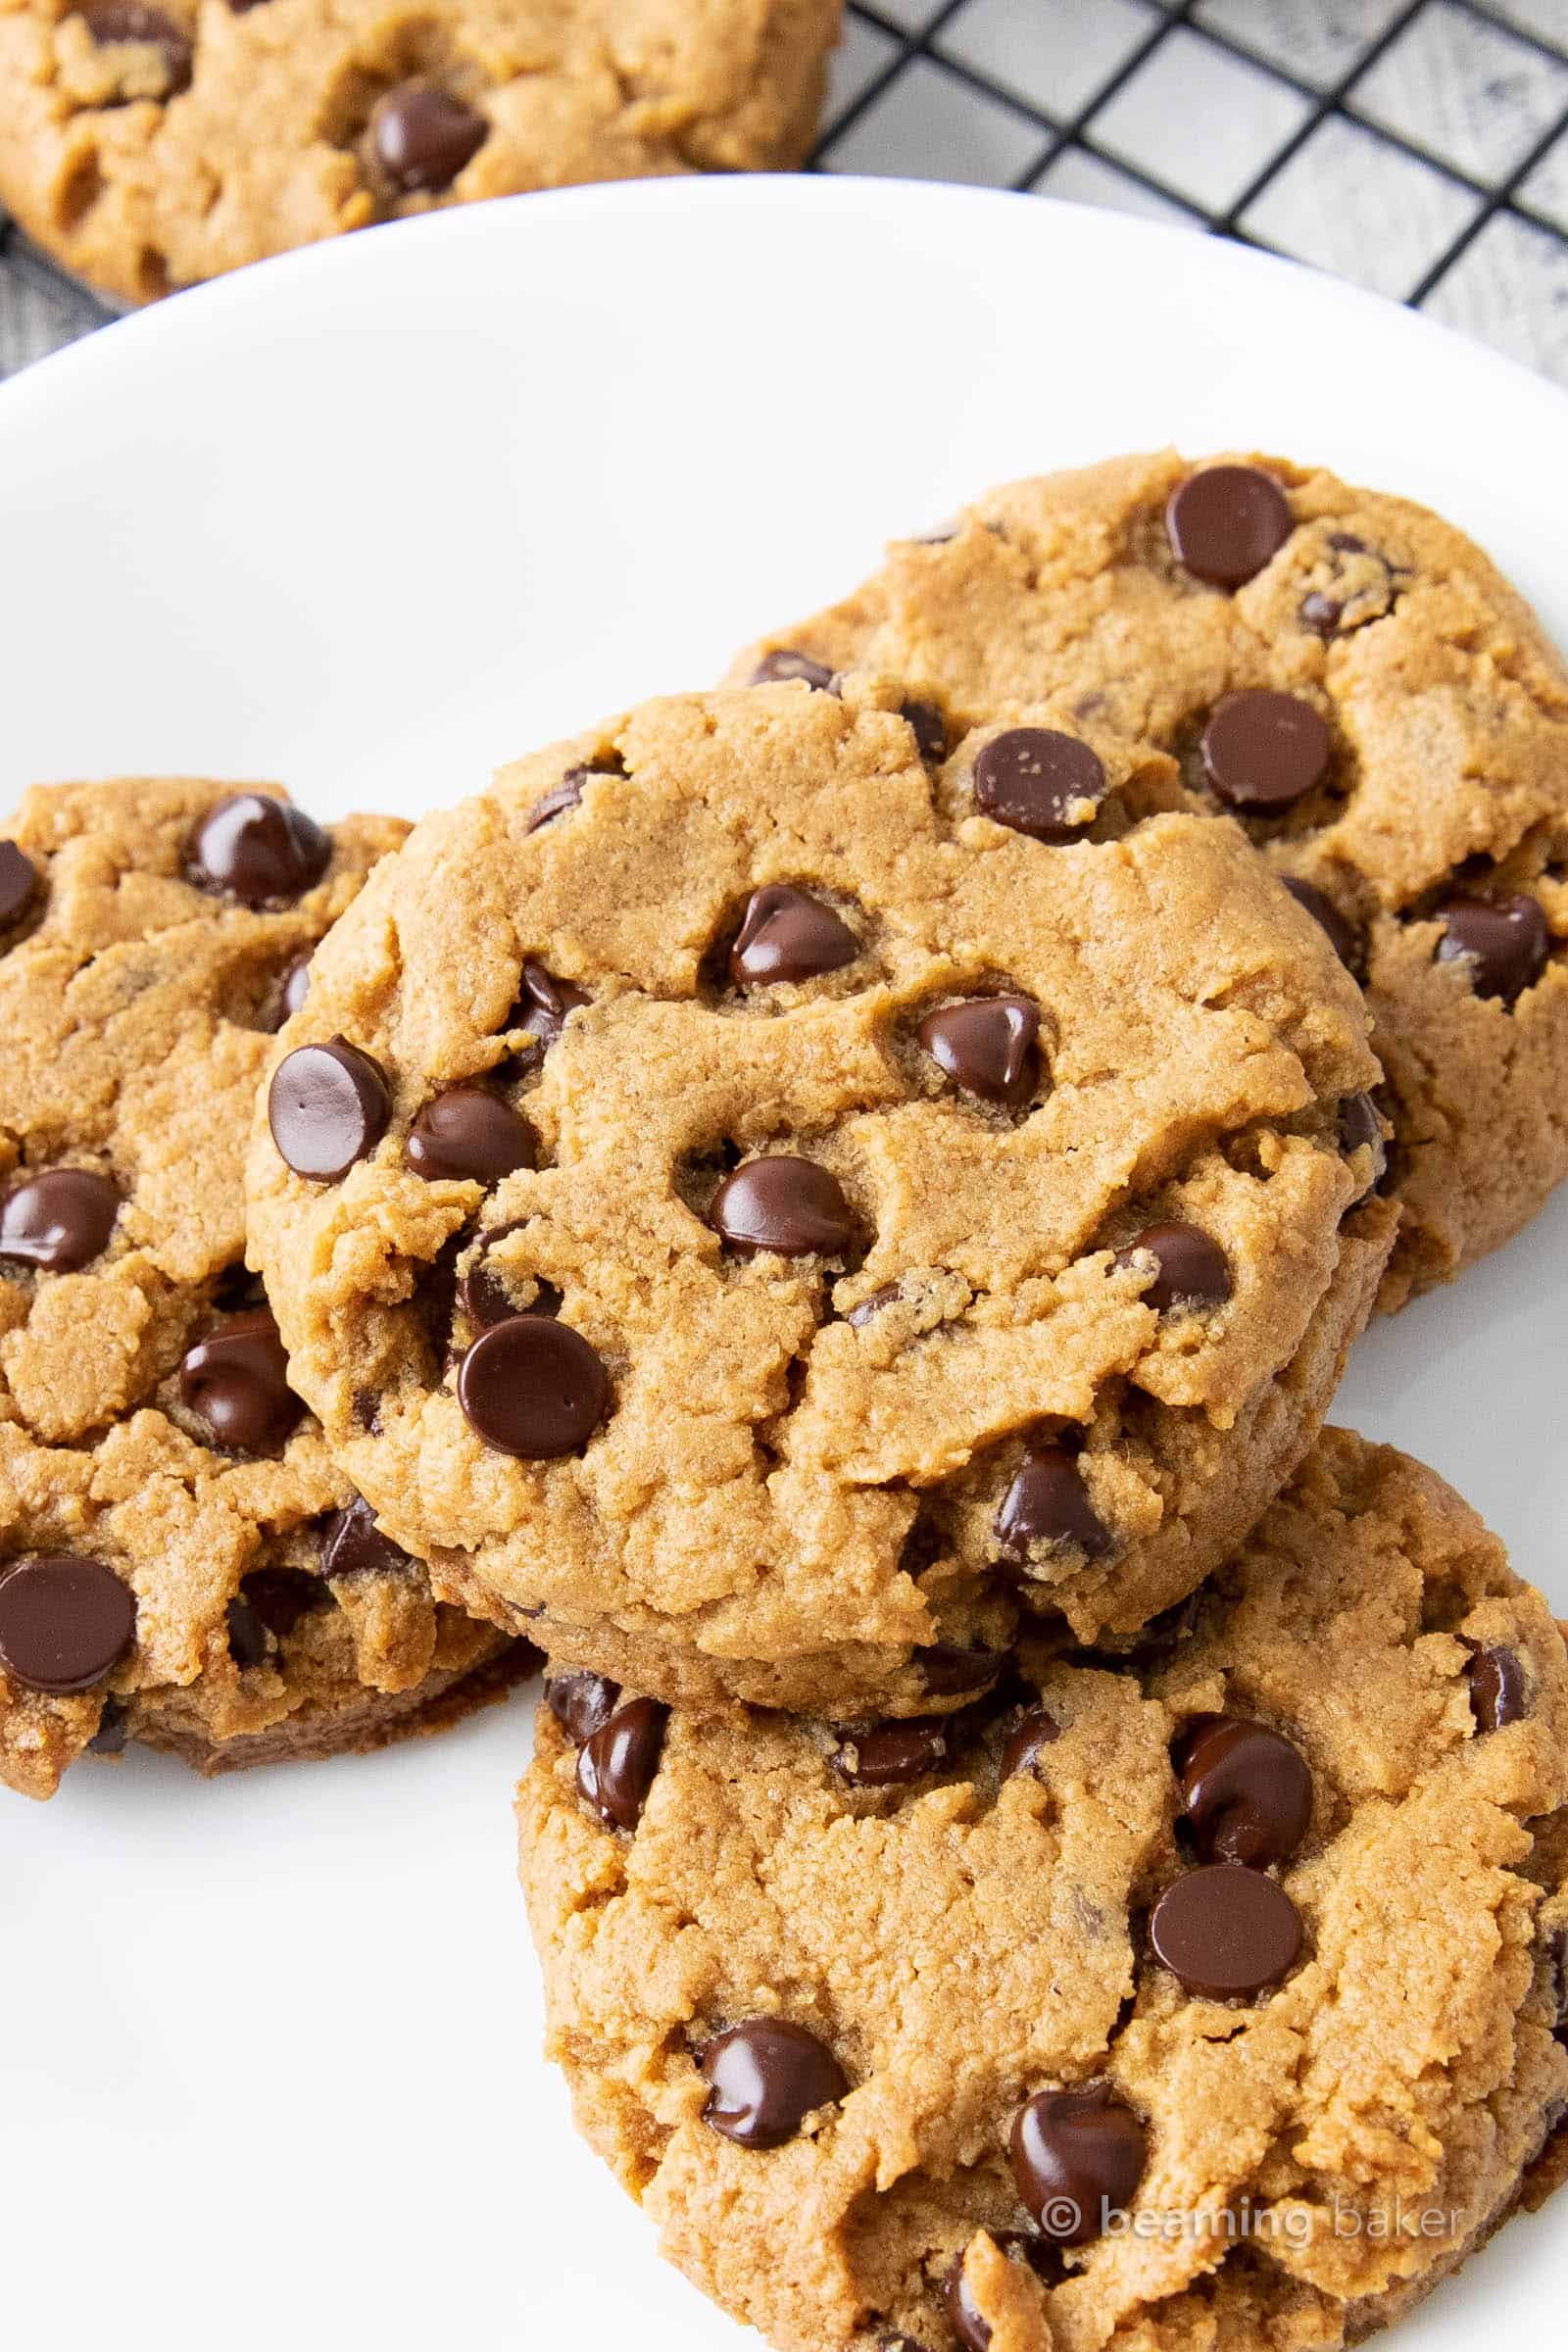 XL super closeup view of fresh baked keto peanut butter chocolate chip cookies